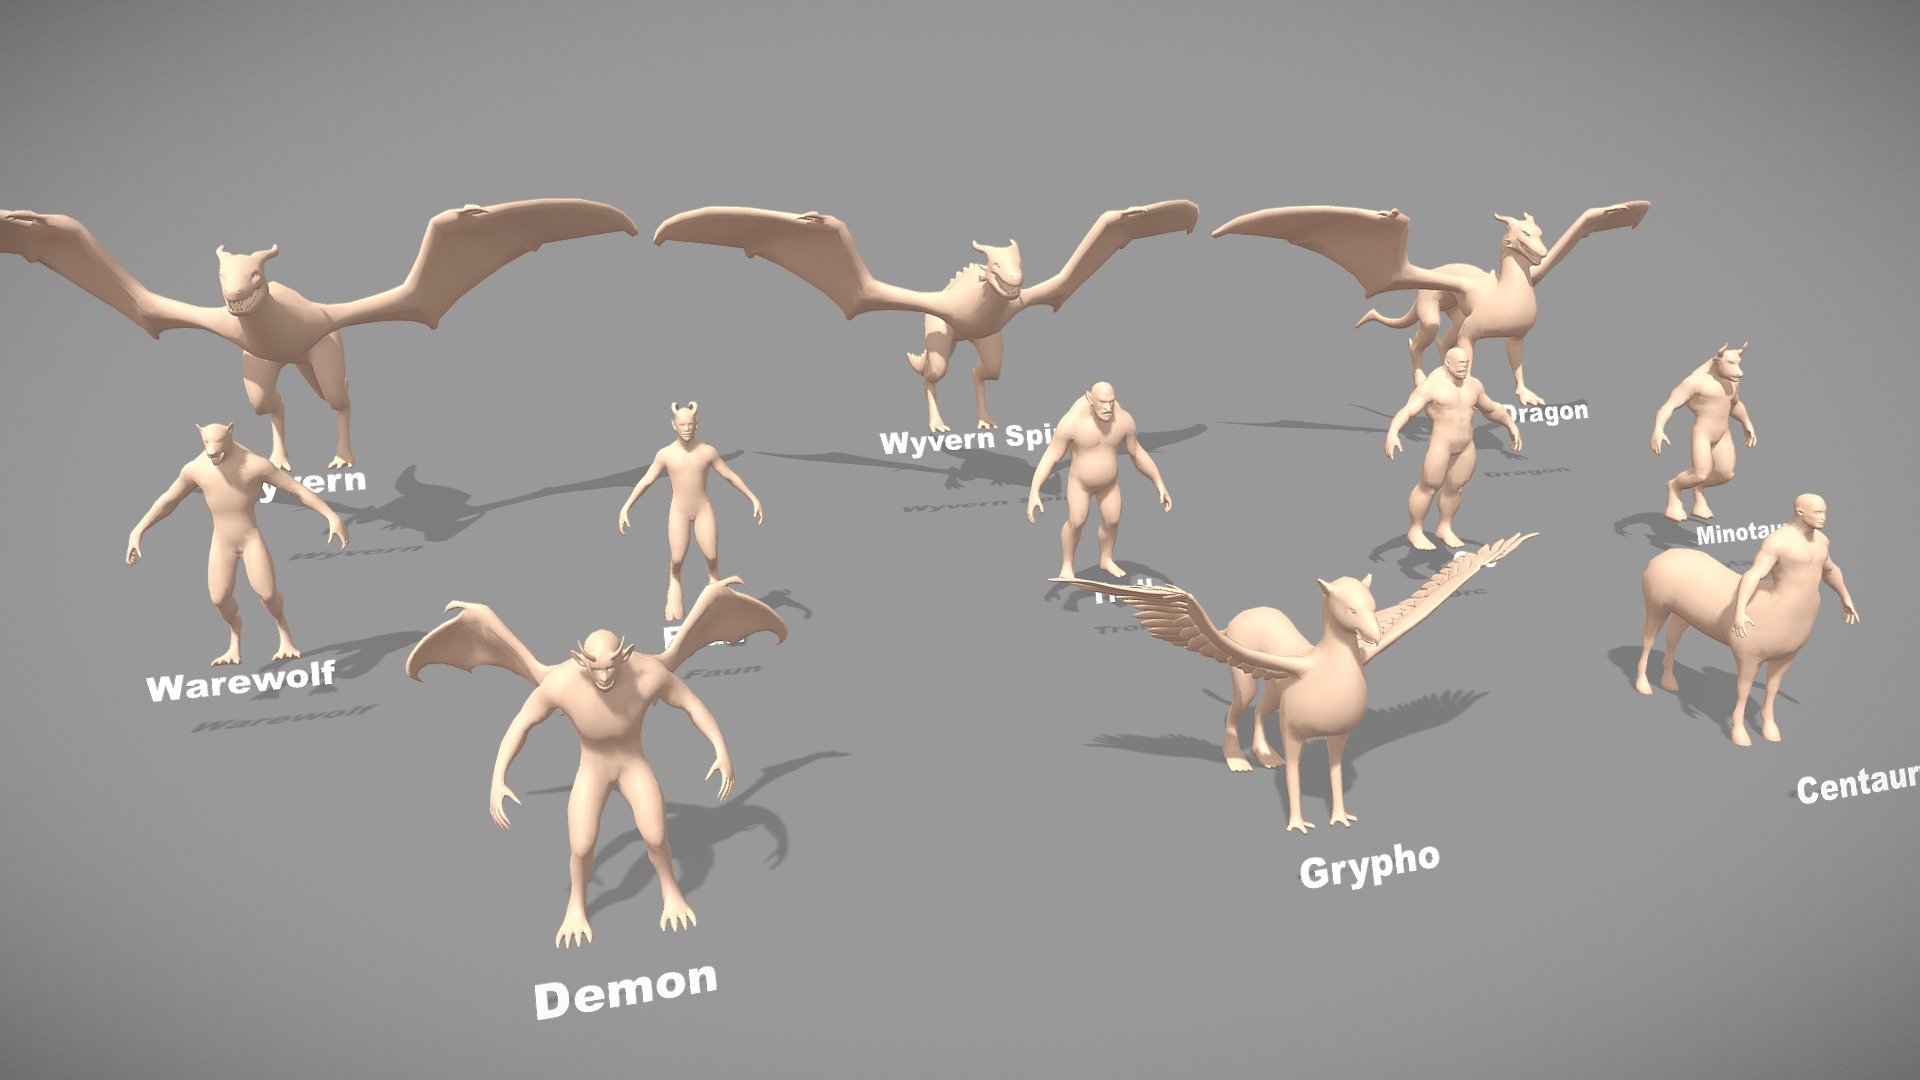 Includes 11 of the most basic creatures mesh sets and is equipped with advanced 3D rendering tools to help increase your productivity! A good background grid allows you to save time with good proportions, clear topology, and clean paint weight.
Features:

1.Low polygon count (good for games and retopologizing after sculpting)
2. Symmetrical with the origin point at the center of the grid floor (ready for mirroring)
3. 100% quads, clean topology, subdivision ready
4. Full uv for characters
5. Detailed body ( eyes, mouth, teeth, tongue )

Package description included:



11 file FBX ( 95k tris)





Demon ( 8149 tris )

Grypho ( 21858 tris )

Centaur ( 8162 tris )

Warewolf ( 8355 tris )

Faun ( 8046 tris )

Troll ( 7976 tris )

Orc ( 5698 tris )

Minotaur ( 5272 tris )

Wyvern ( 5702 tris )

Wyvern Spiny ( 7182 tris )

Dragon ( 8614 tris )


Contact me for support. Hope to receive feedback from everyone. Thank - Base Meshes Monster - Pack Lowpoly - Buy Royalty Free 3D model by DuNguyn - Assets store (@nguyenvuduc2000) 3d model